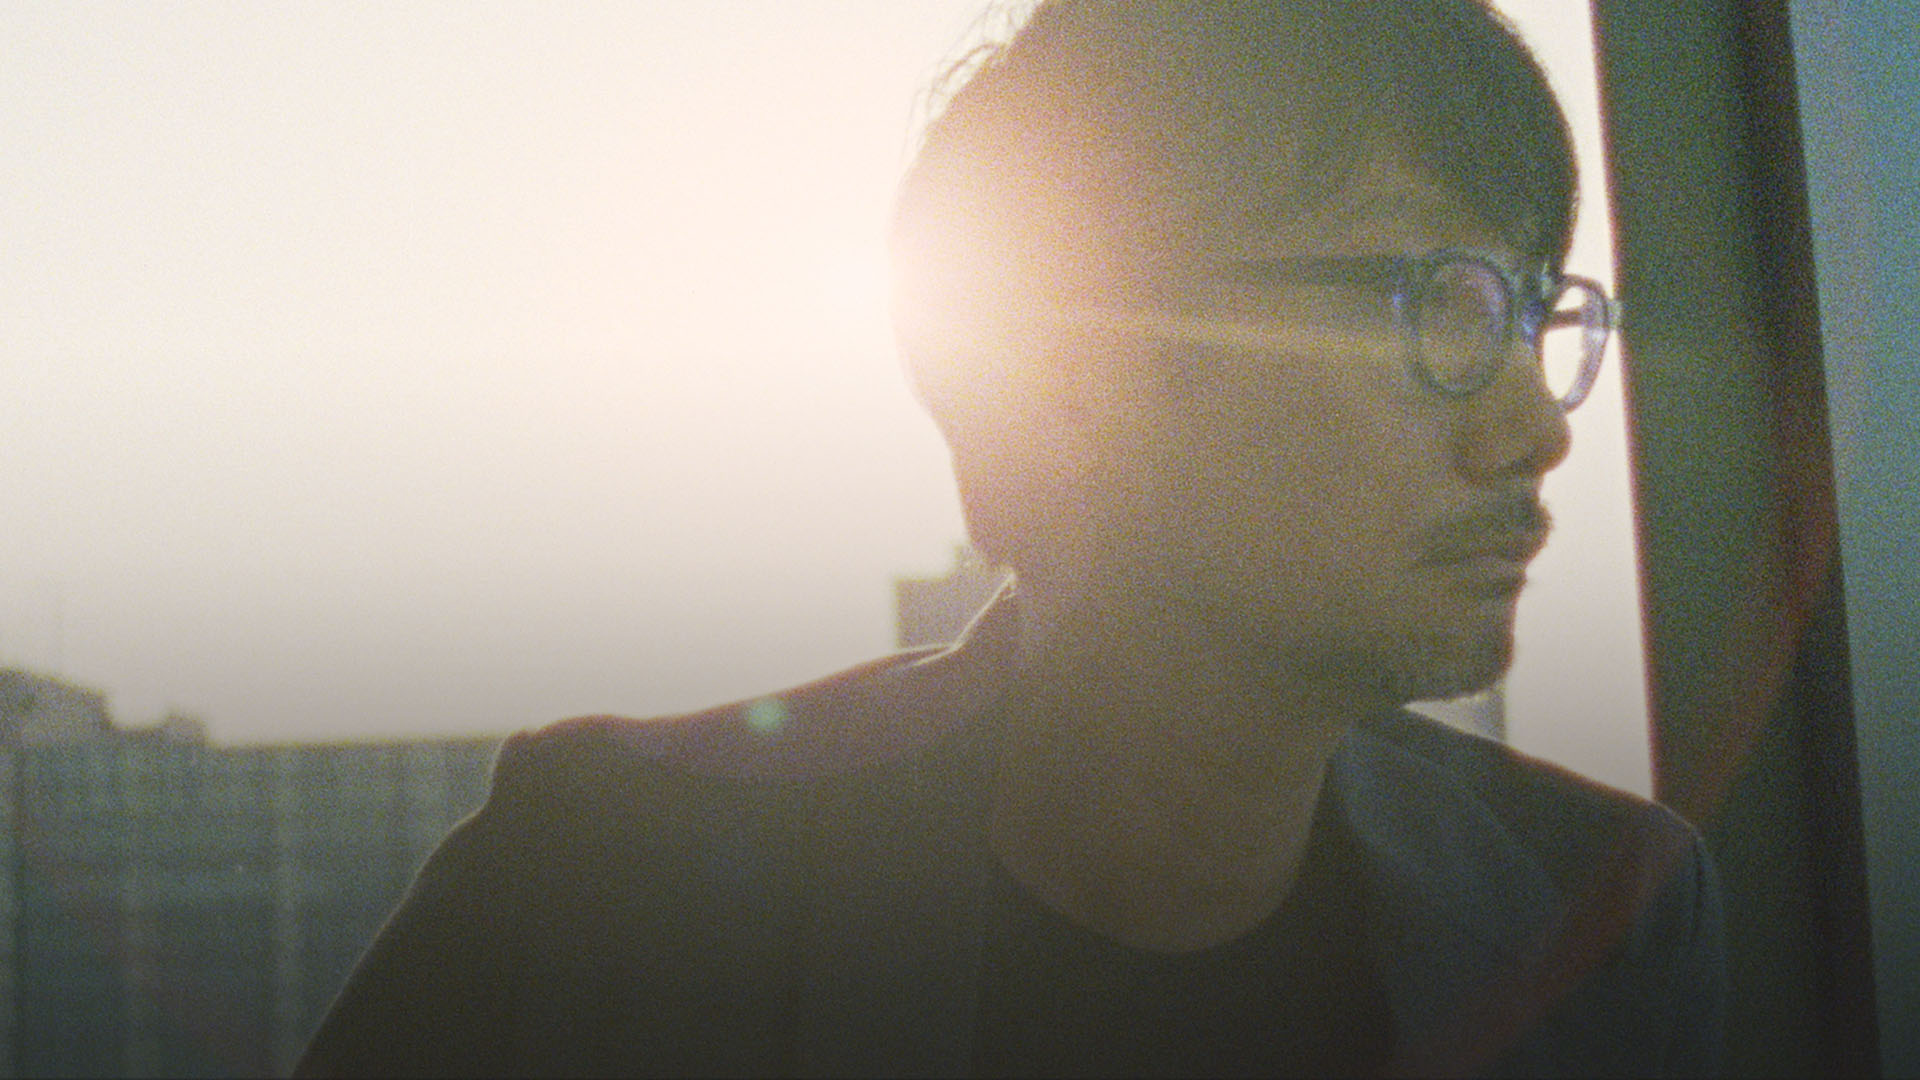 Hideo Kojima & PlayStation Reveal Documentary 'Connecting Worlds